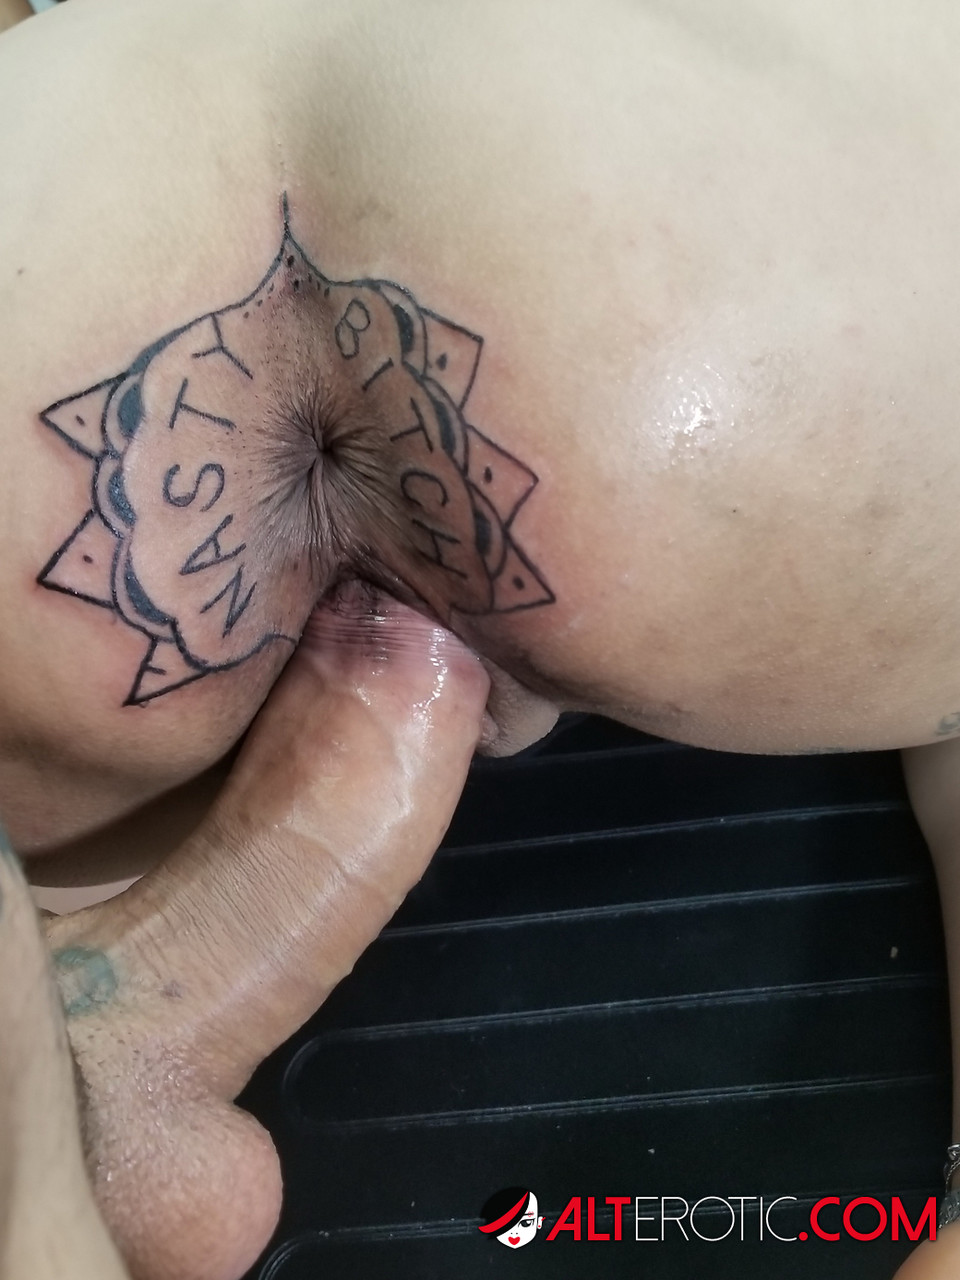 Latina chick Kitty Jaguar gets a butt tattoo before being fucked porn photo #424168461 | Alt Erotic Pics, Kitty Jaguar, Tattoo, mobile porn